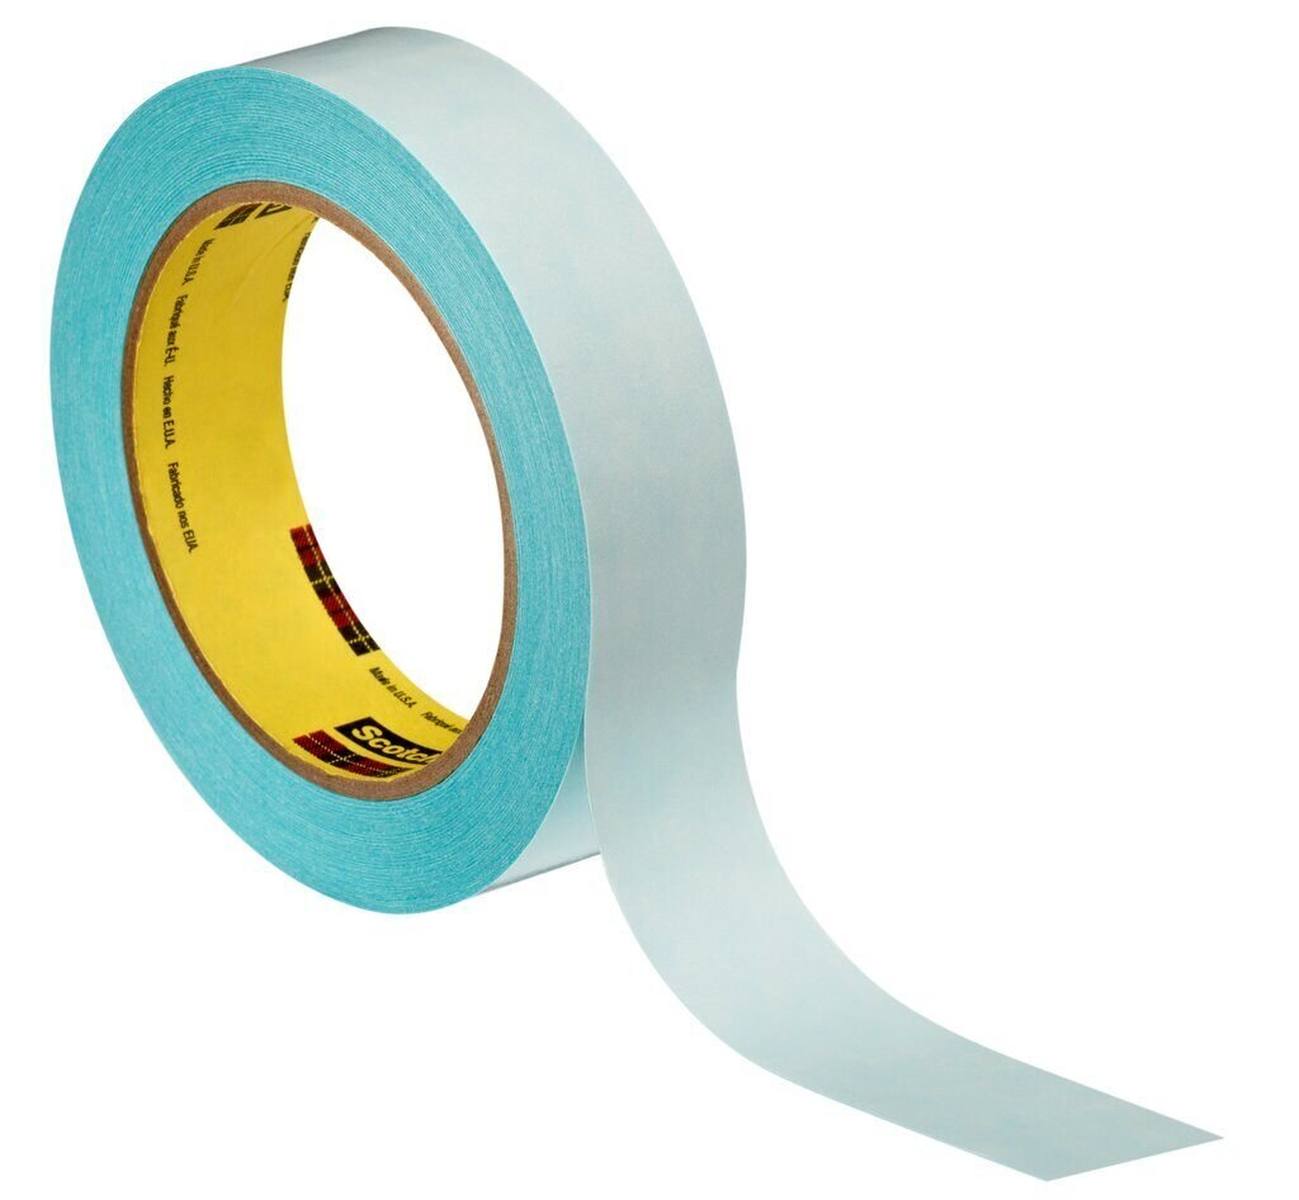 3M Double-sided adhesive tape with polypropylene backing 9576B, black, 50 mm x 50 m, 0.1 mm